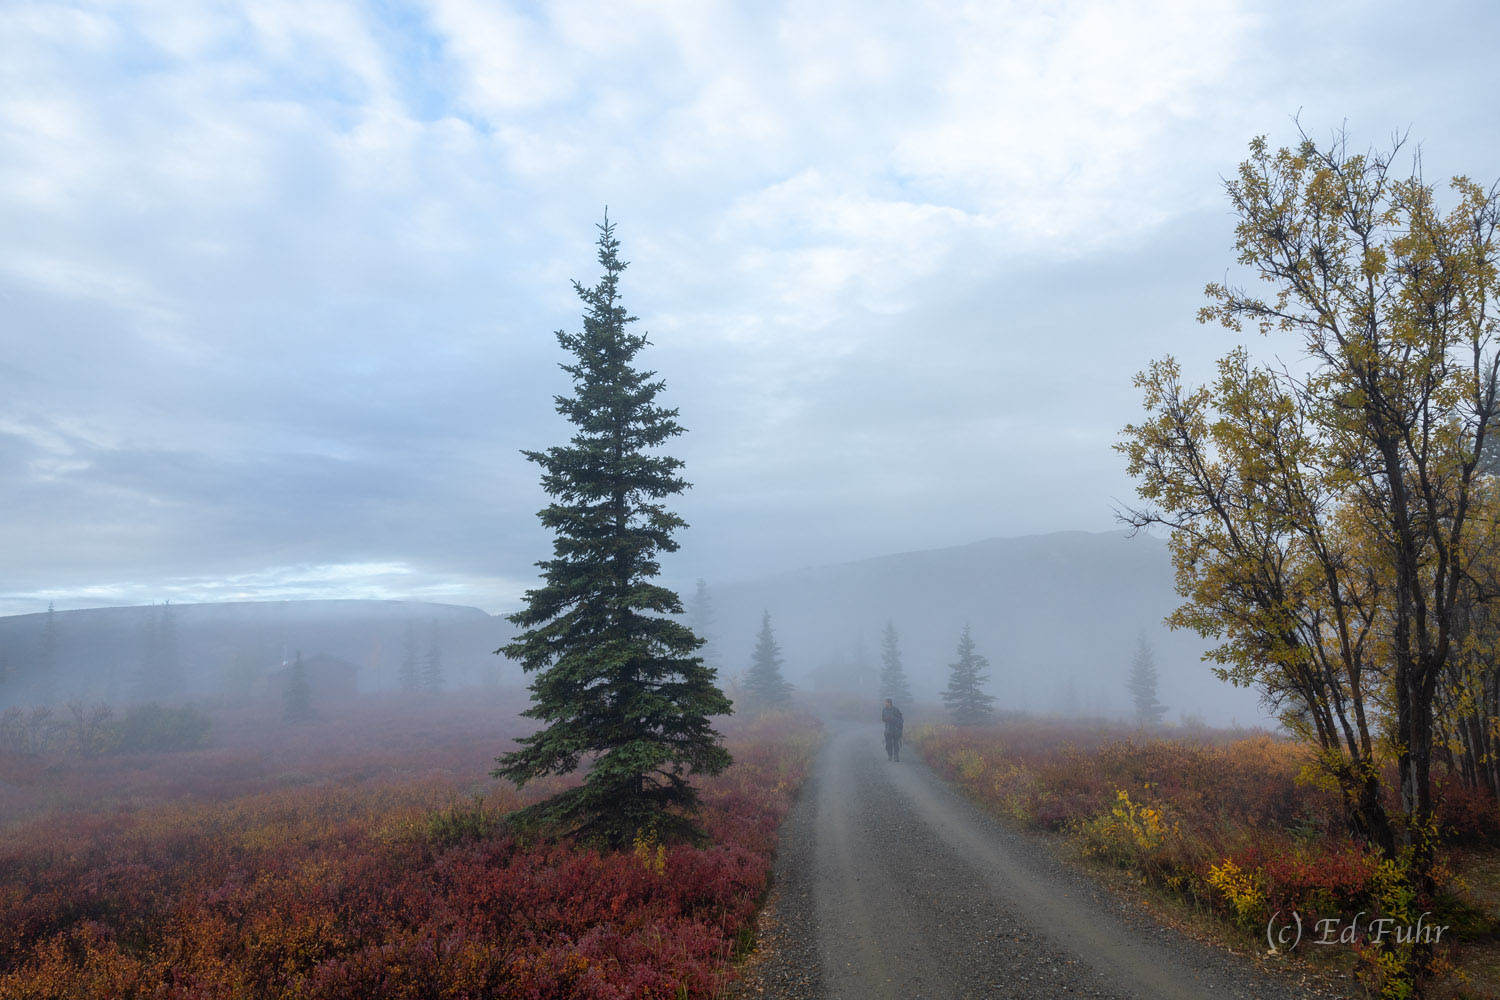 With the roadway closed to vehicles, and heavy fog in the air, a walk along the Denali Park Road is a study in silence and serenity...